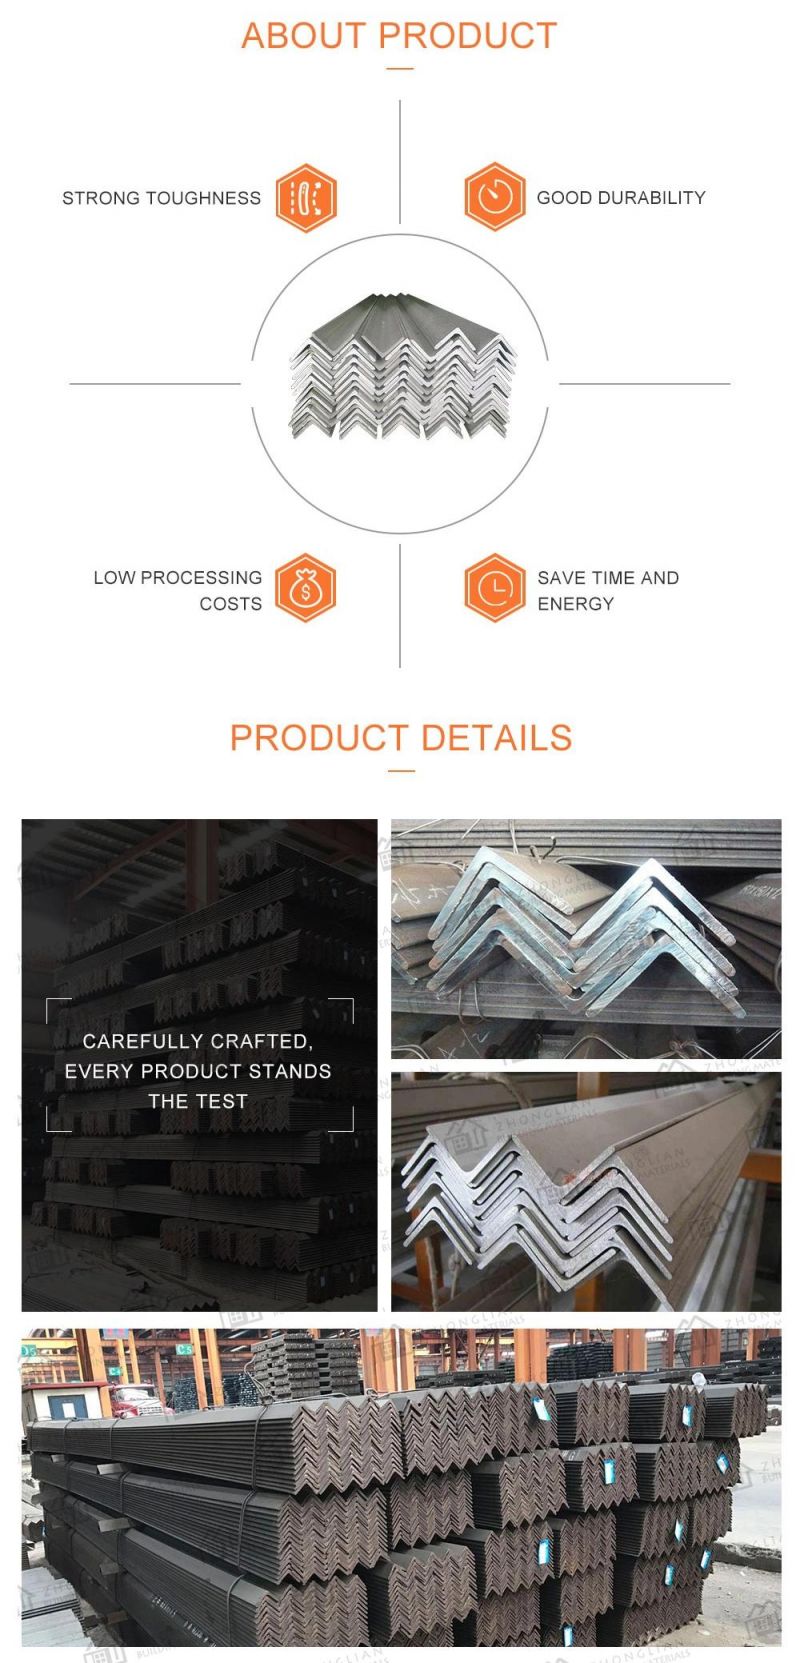 Hot Rolled Steel Angle with Galvanized or Black